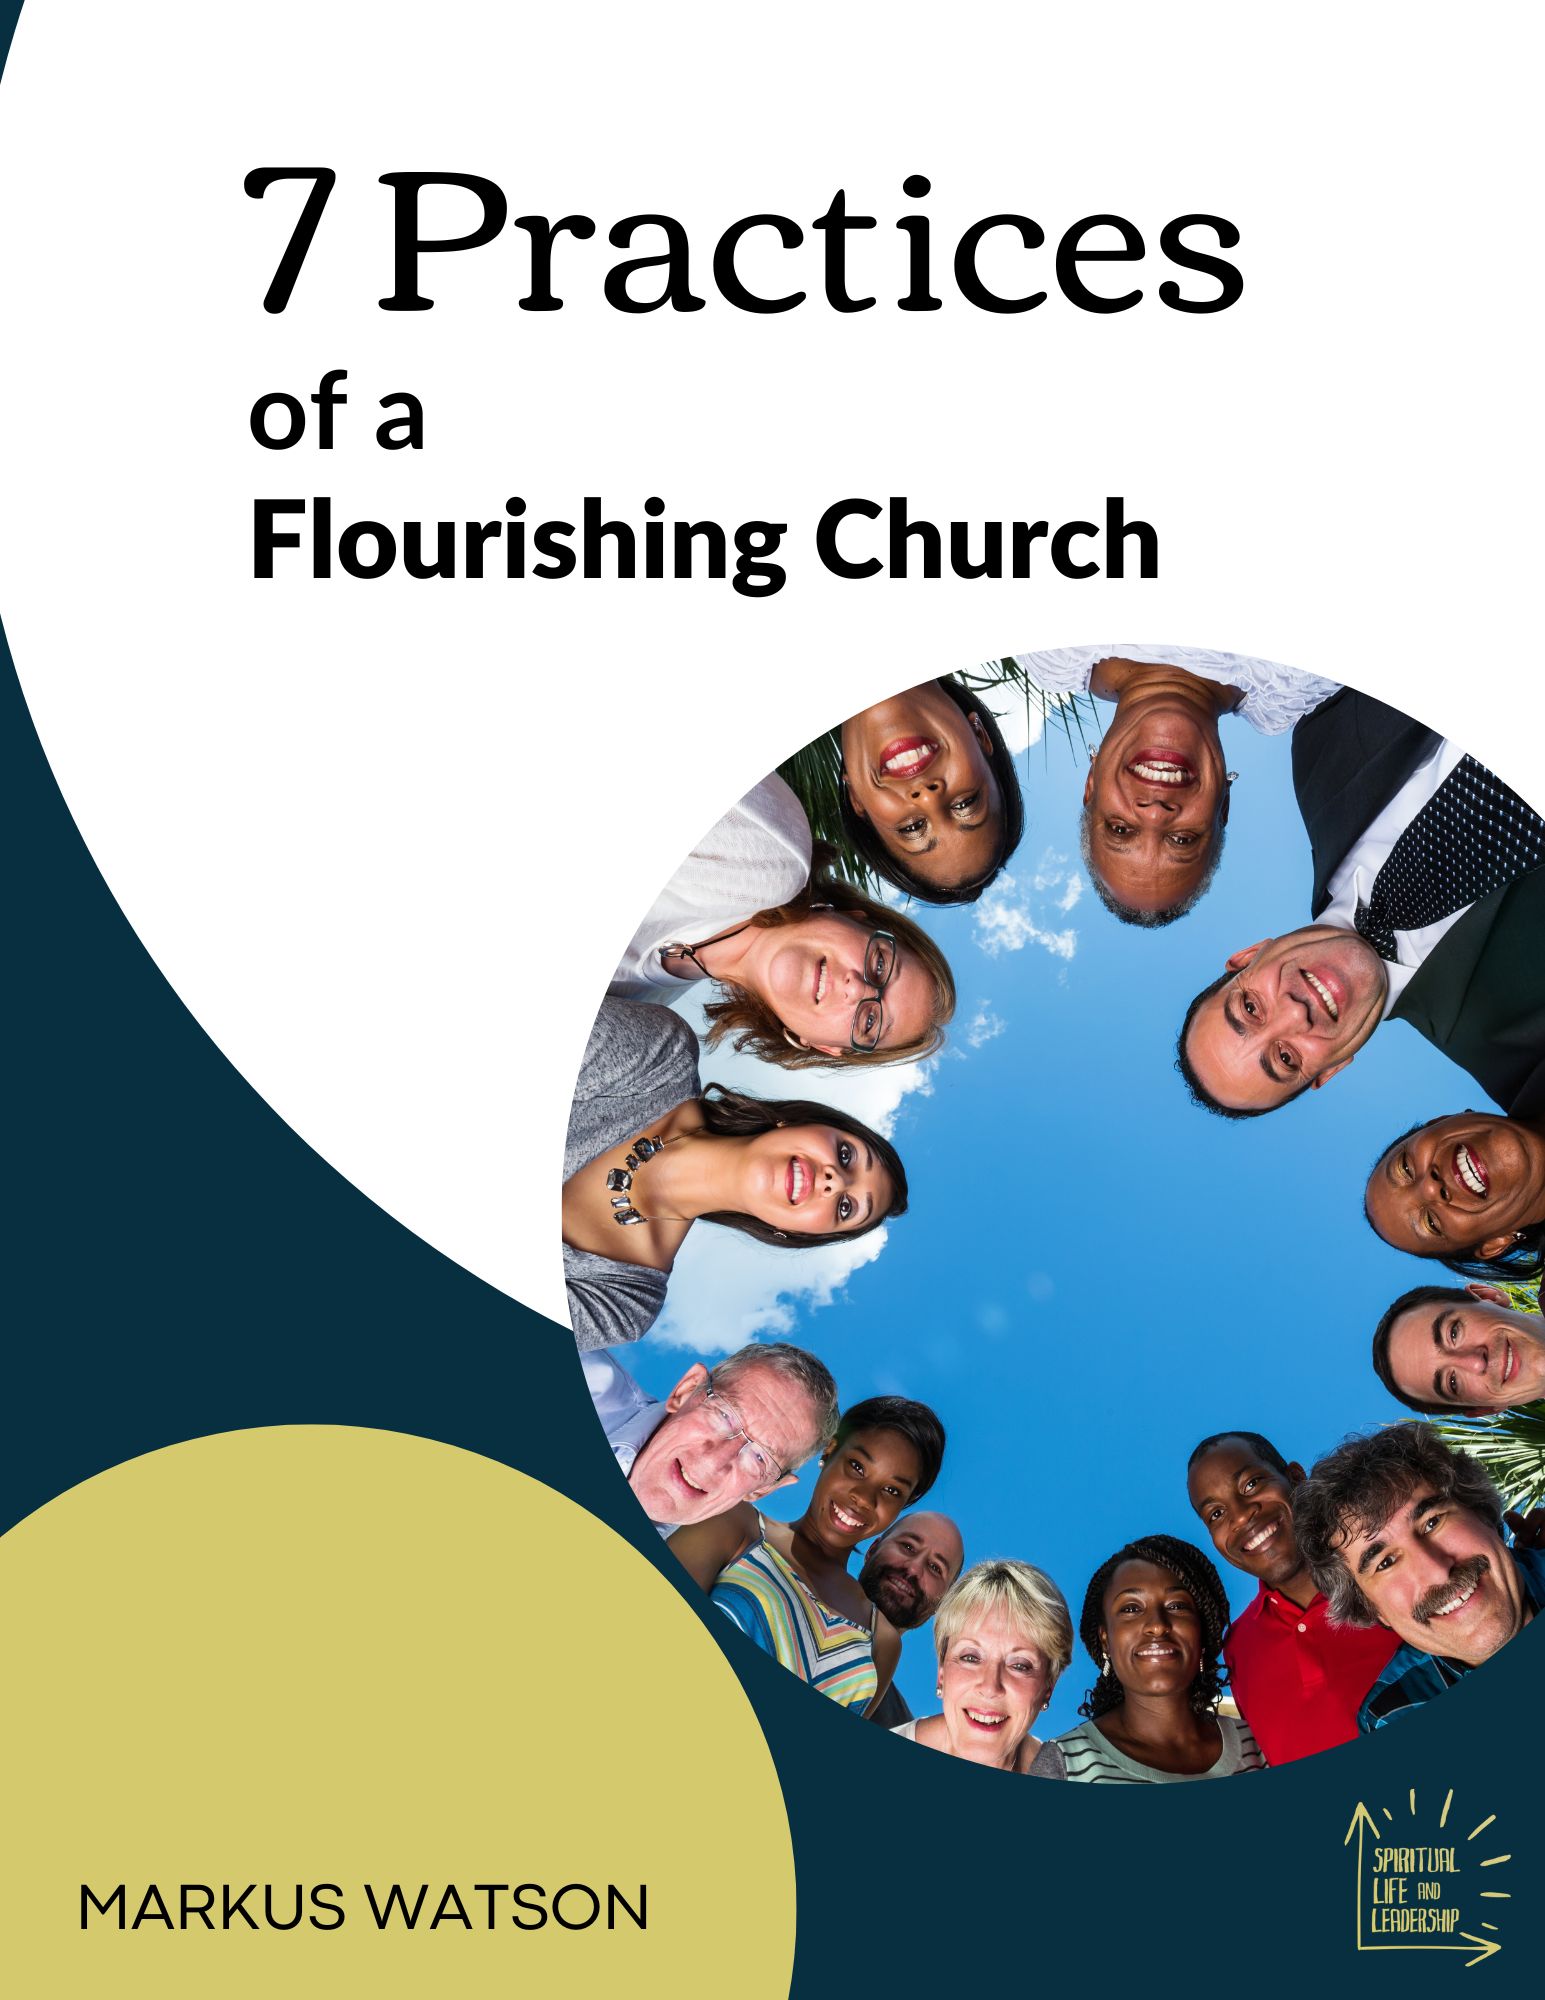 7 Practices of a Flourishing Church